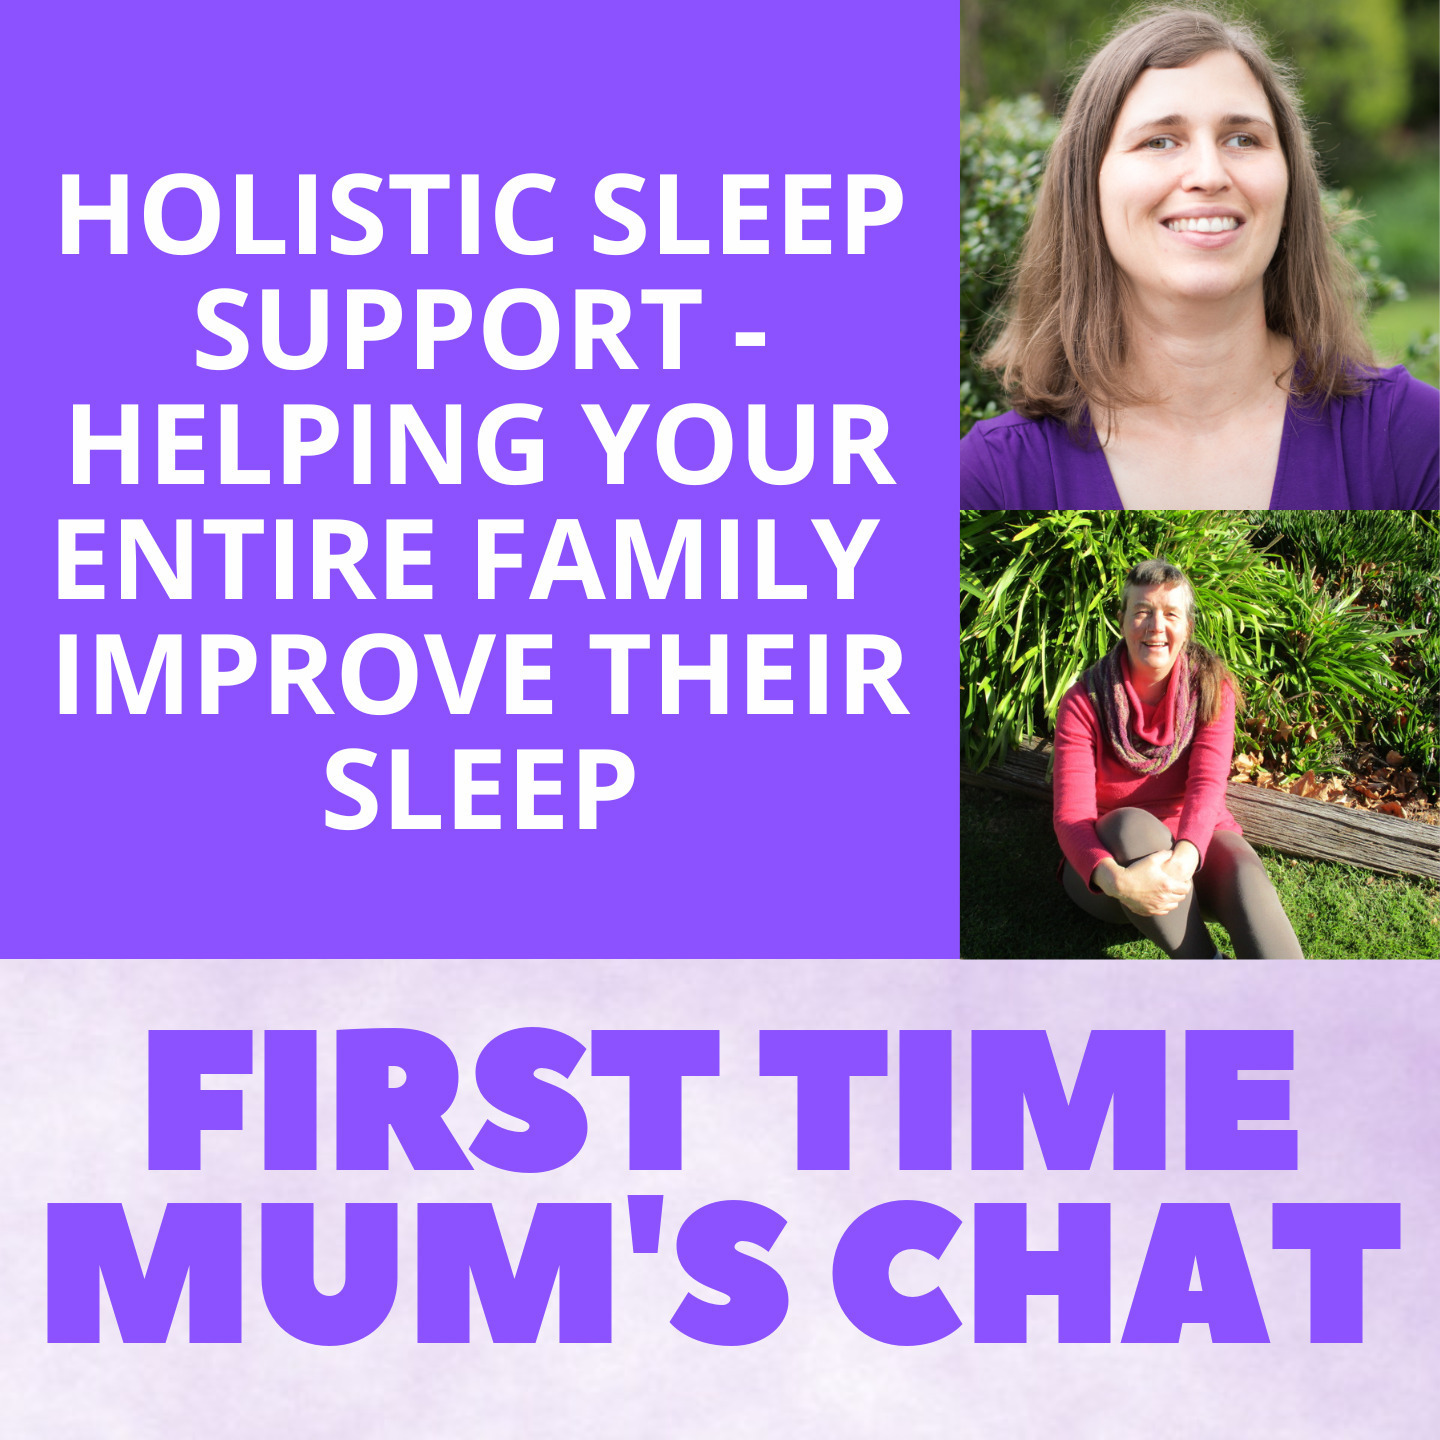 Holistic Sleep Support - Helping Your Entire Family Improve Their Sleep